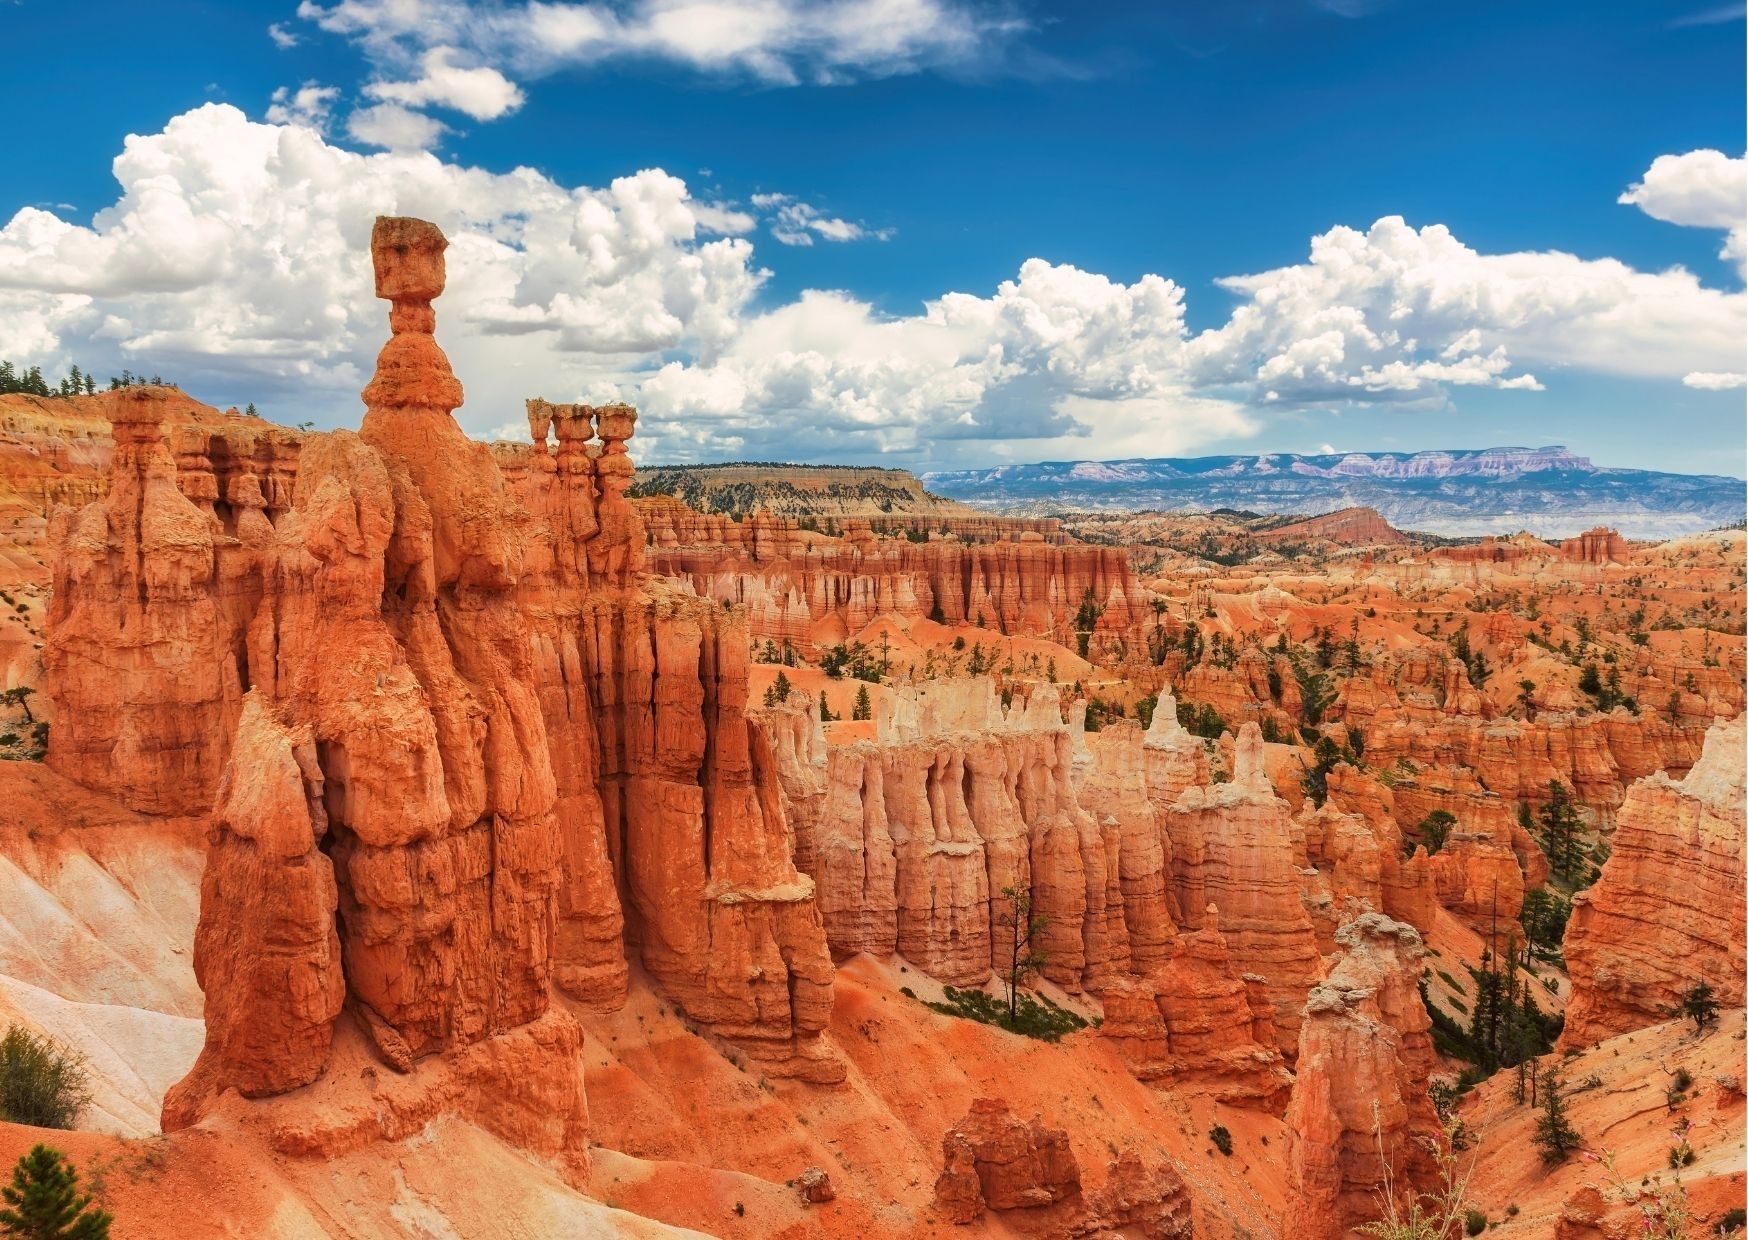 Utah is full with exciting opportunities that are sure to awaken your sense of adventure